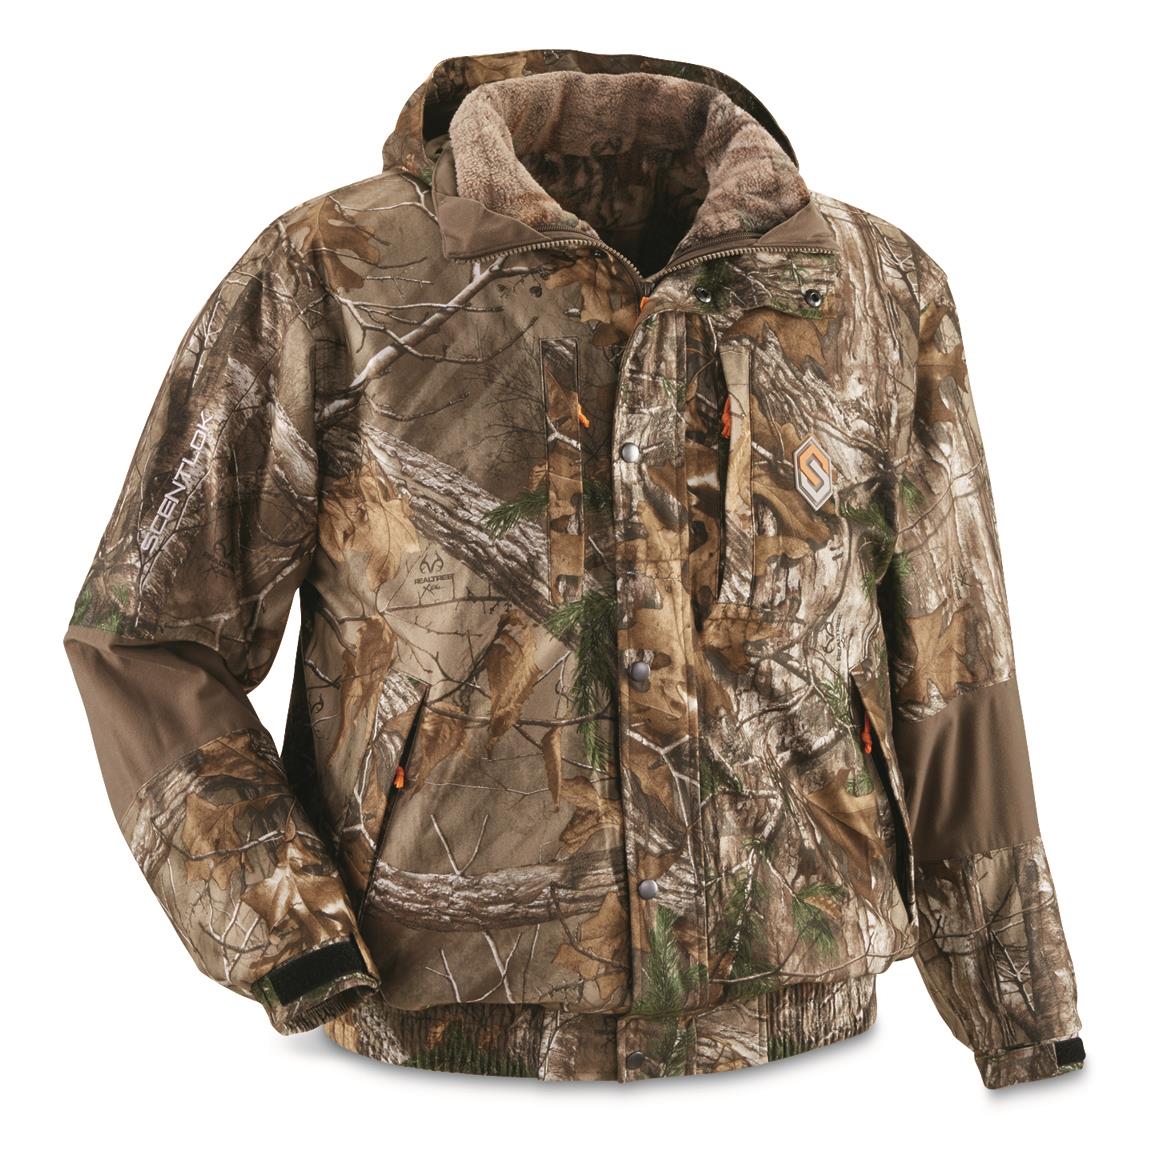 ScentLok Men's Cold Blooded 3-In-1 Hunting Jacket - 675943, Camo ...